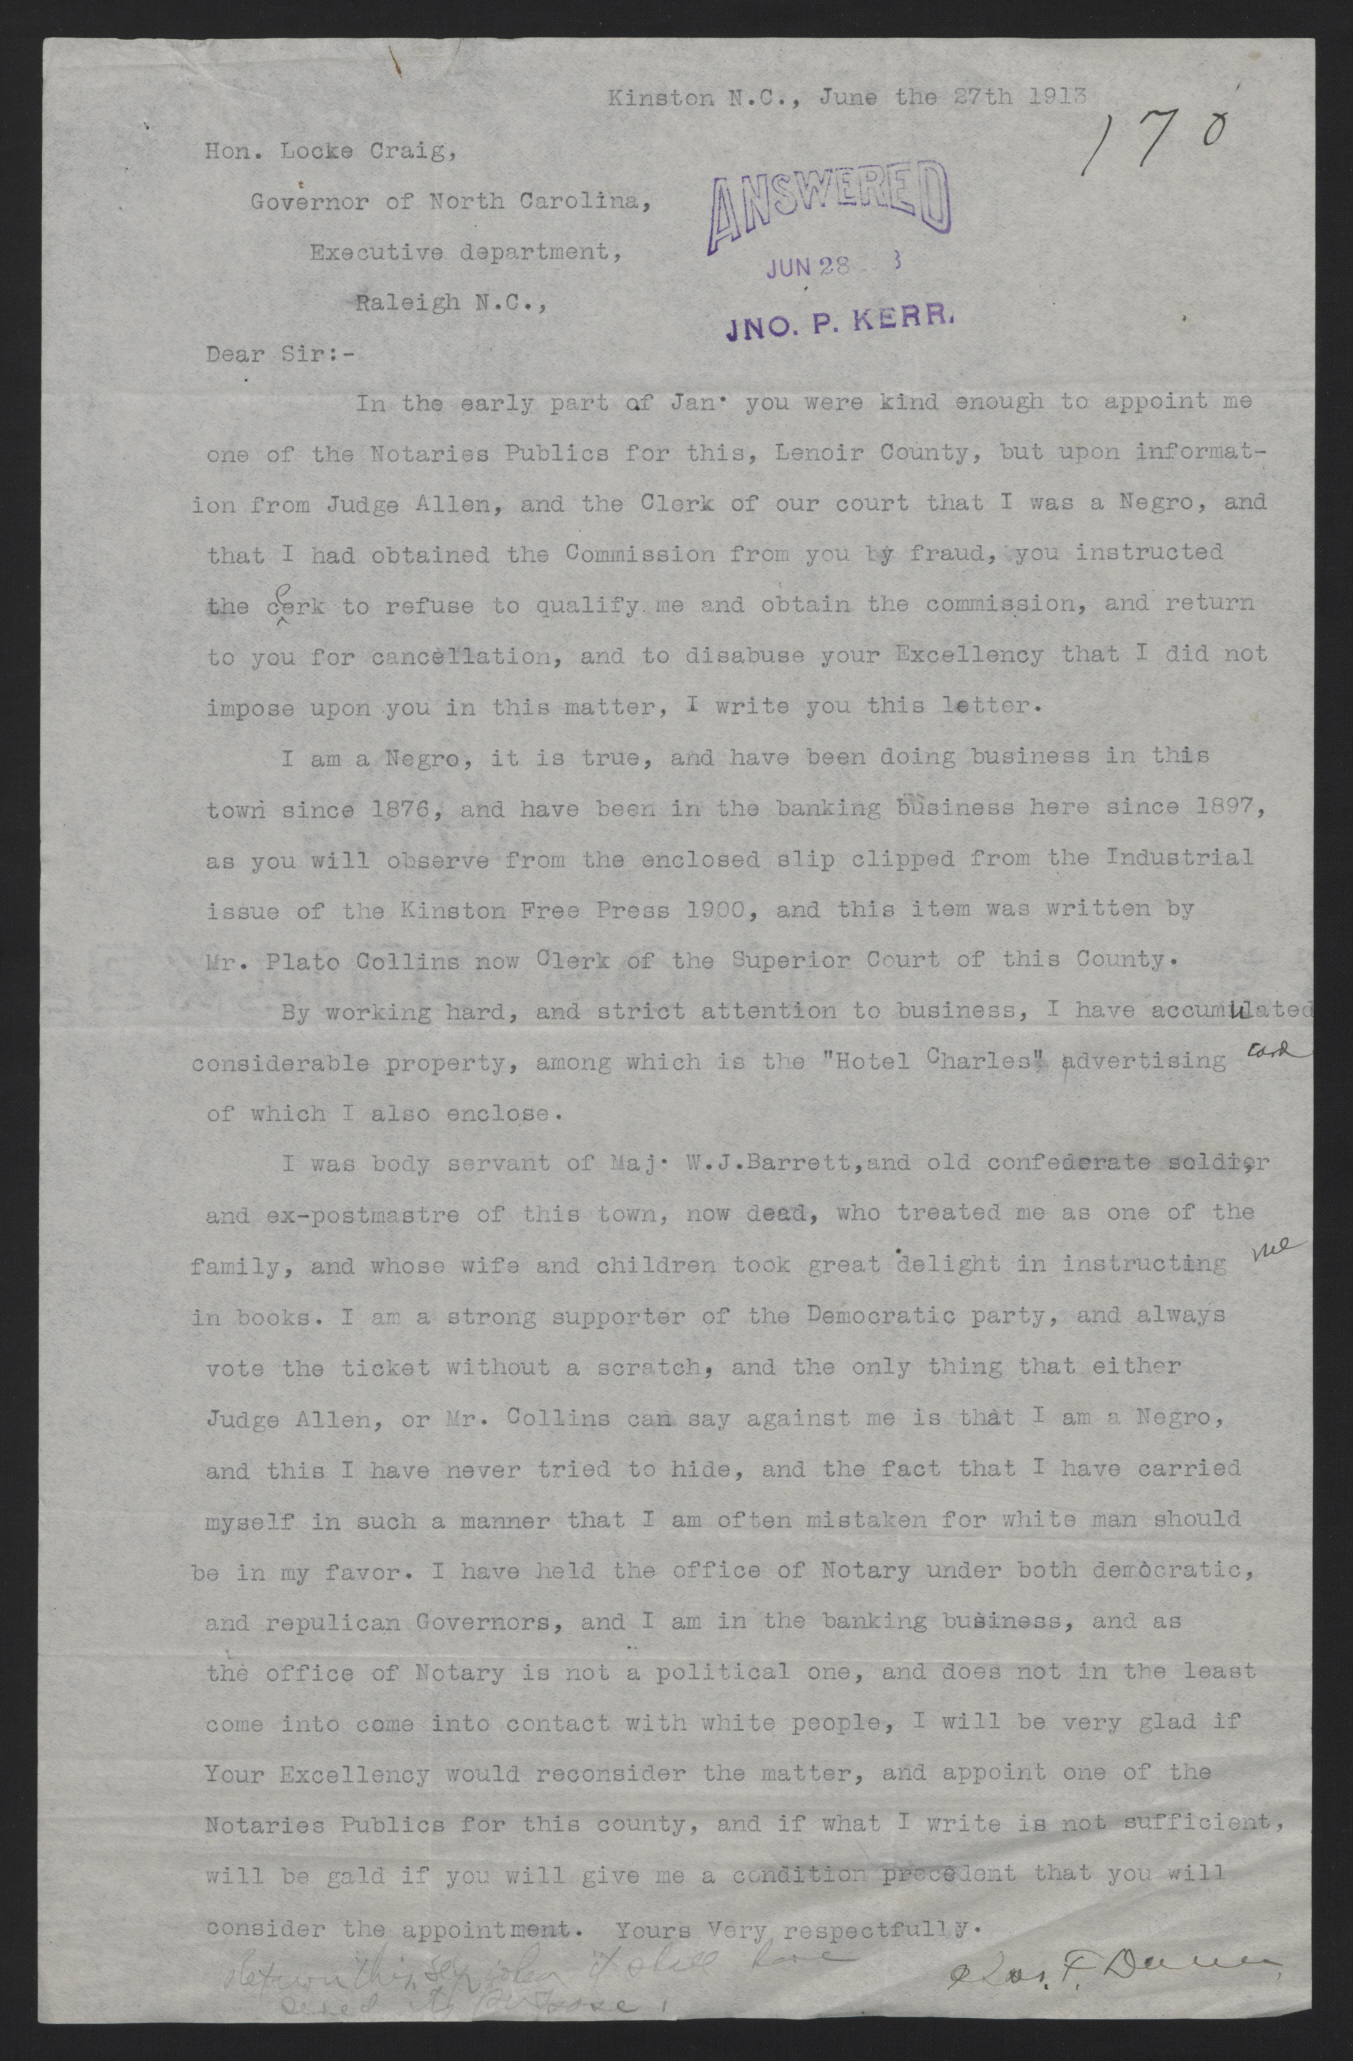 Letter from Dunn to Craig, June 27, 1913